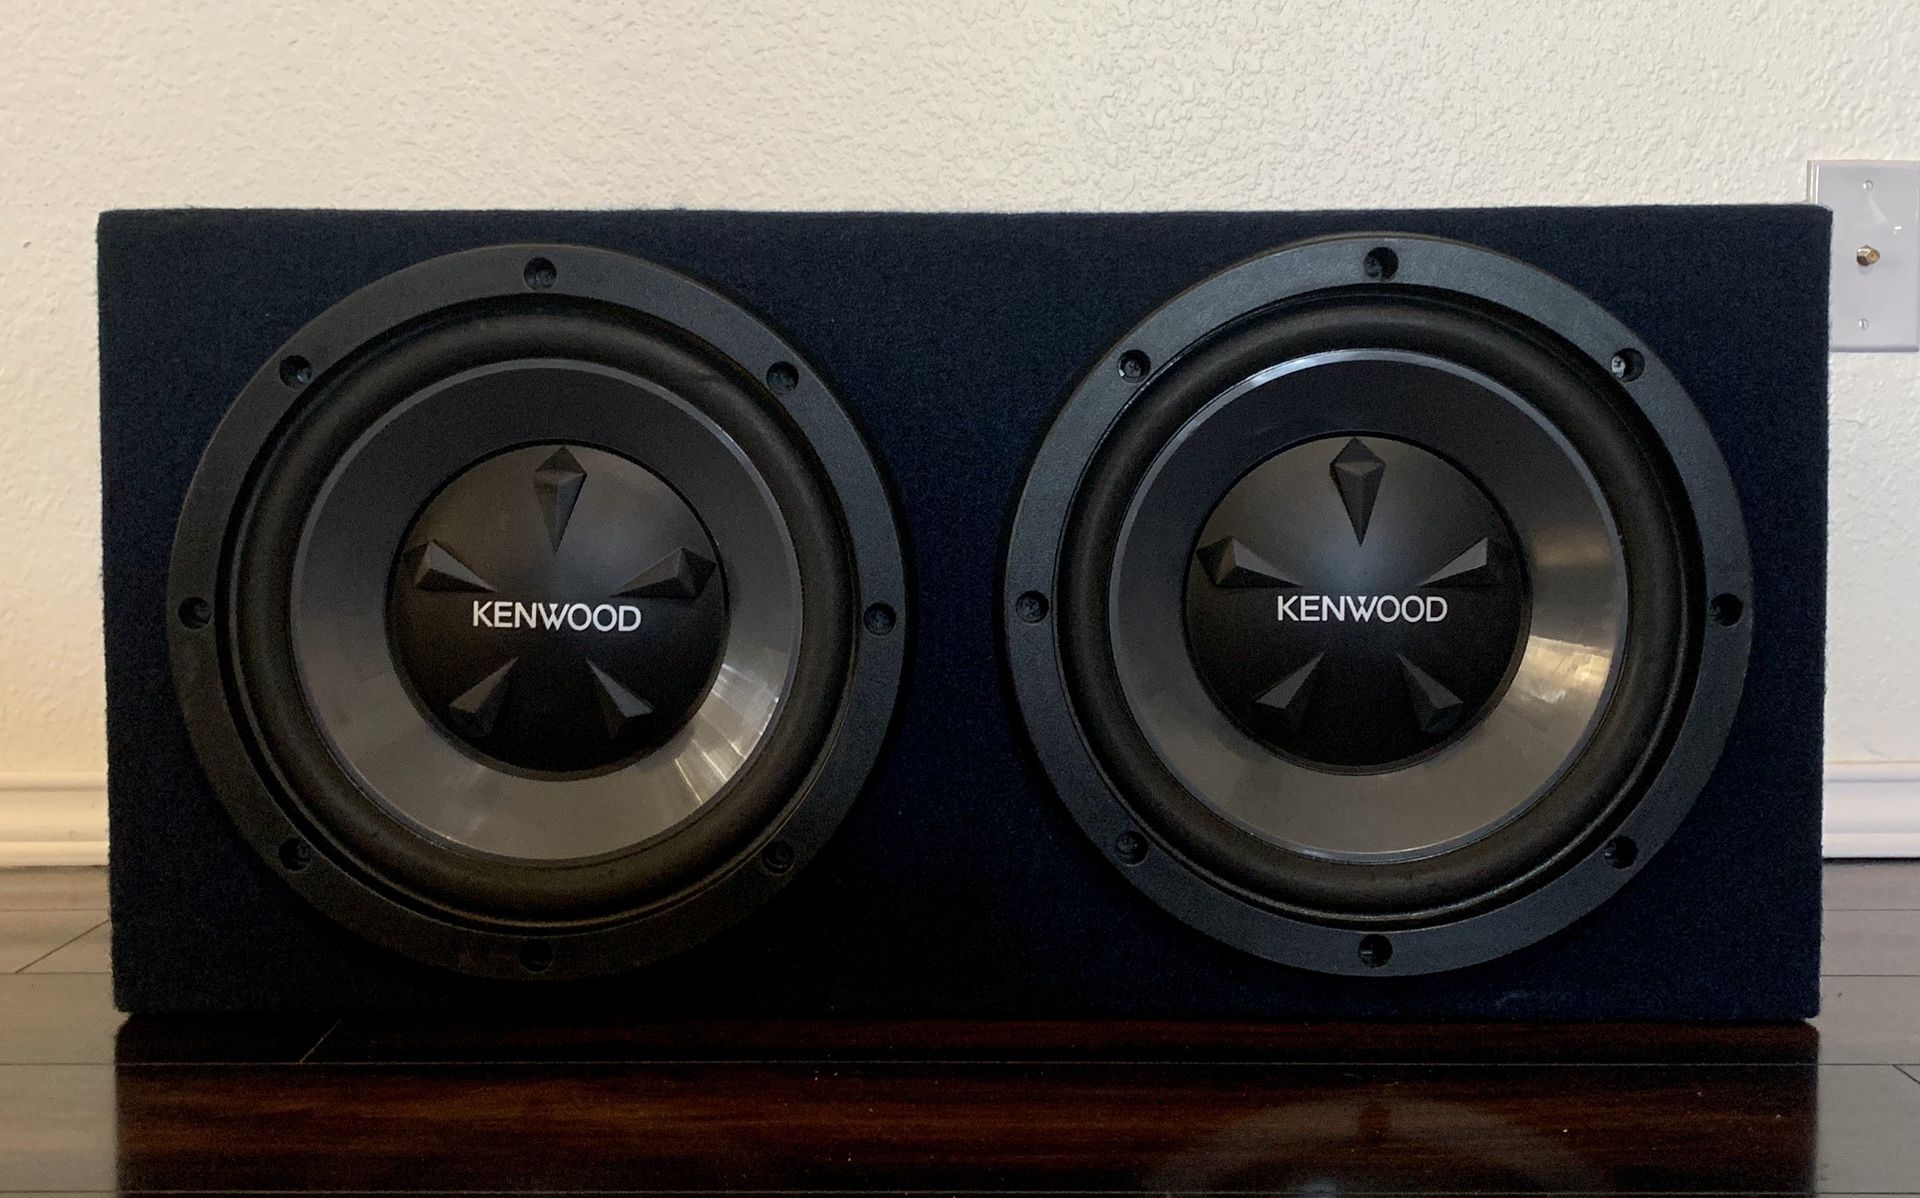 Pair of 12” Kenwood 800W Car Subwoofers in Box - NICE